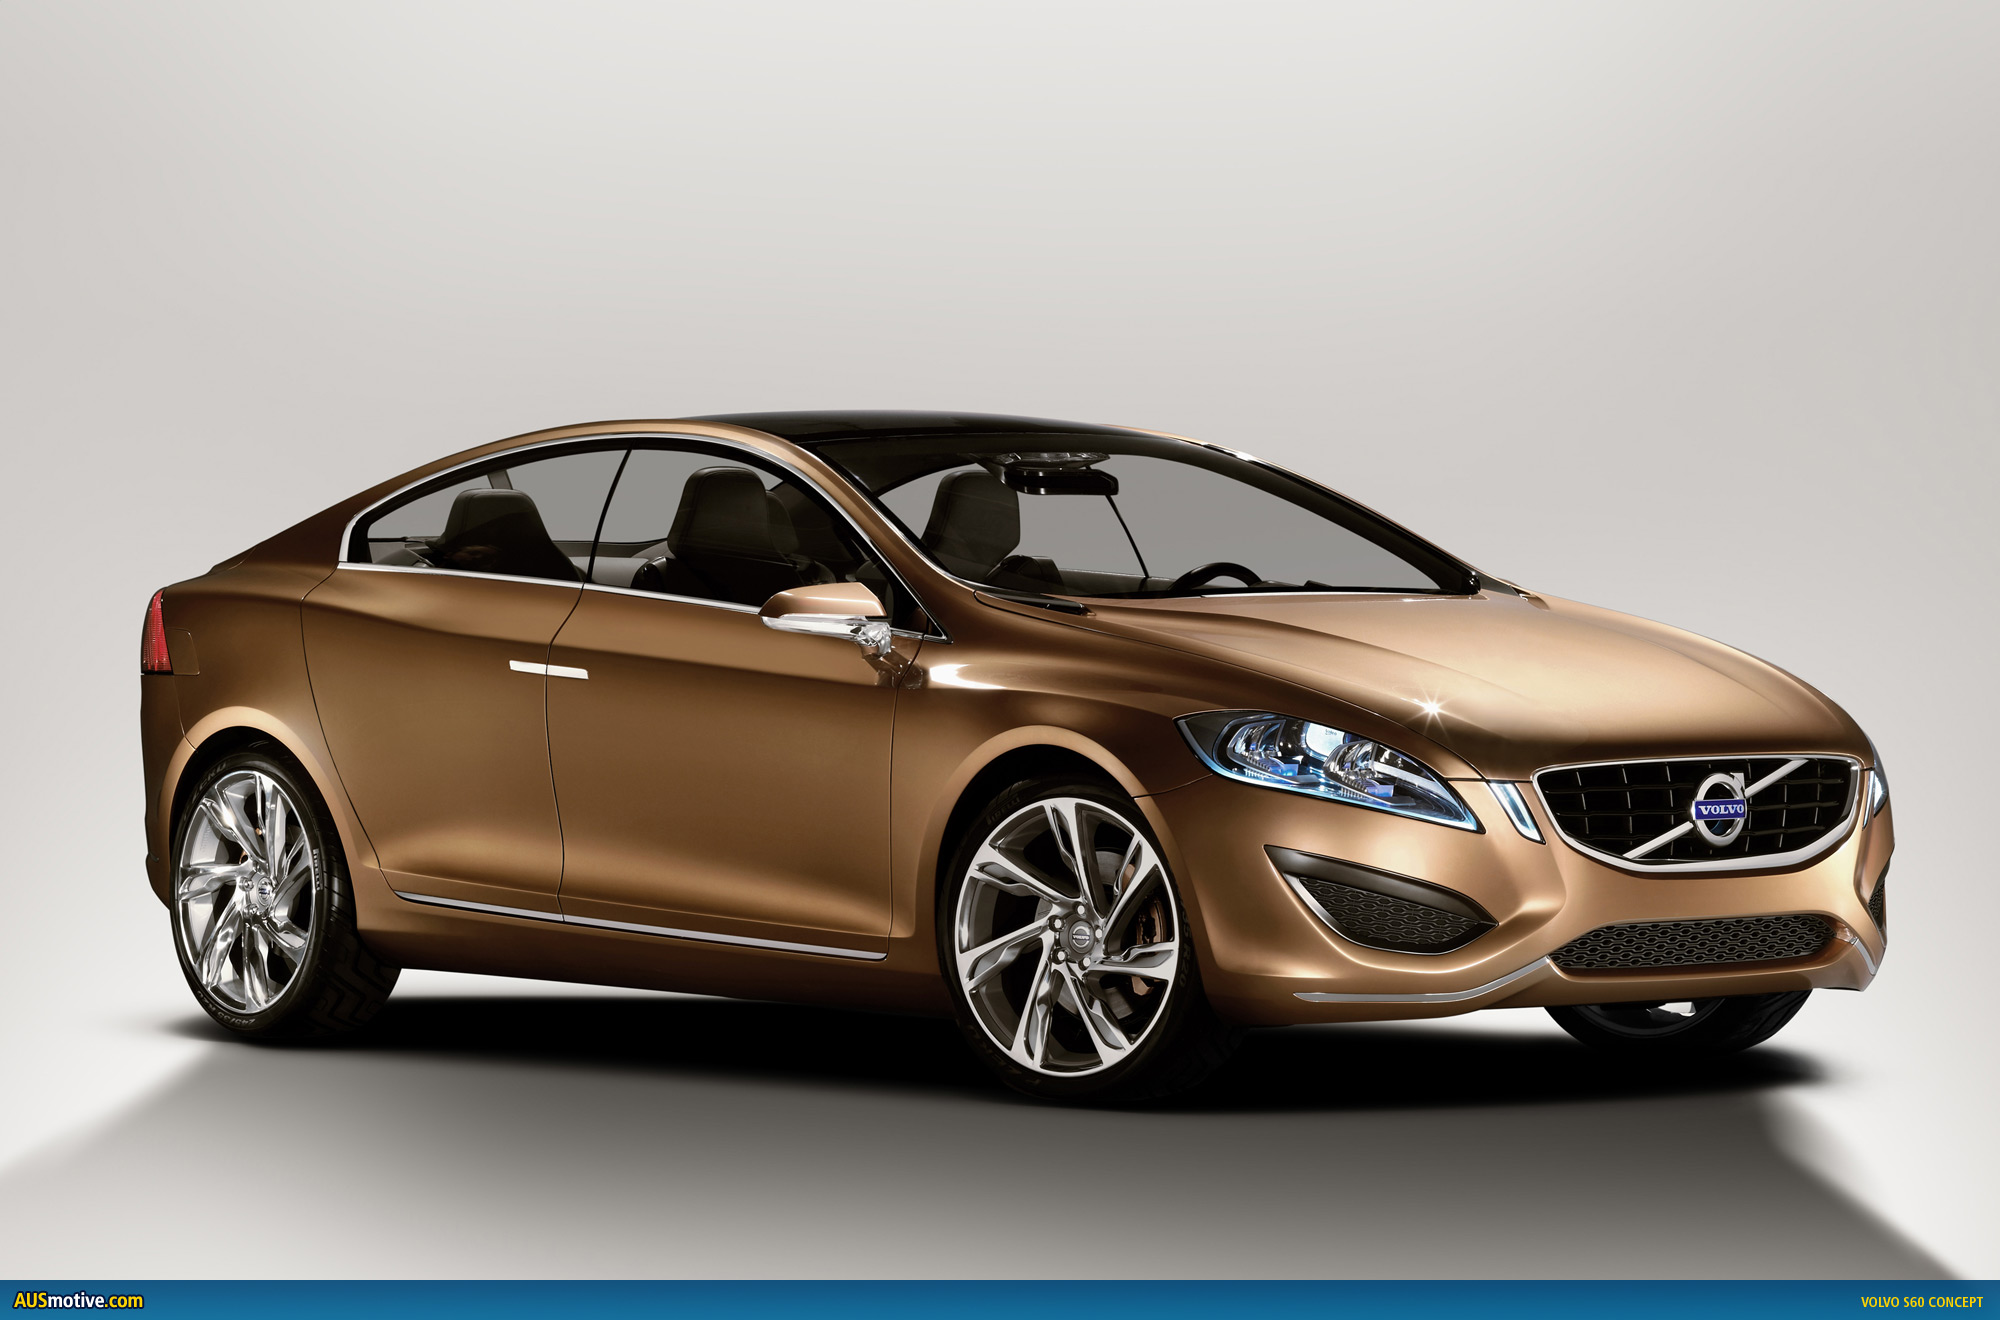 Volvo S60 Concept. It's a Volvo Jim, but not as we know it.